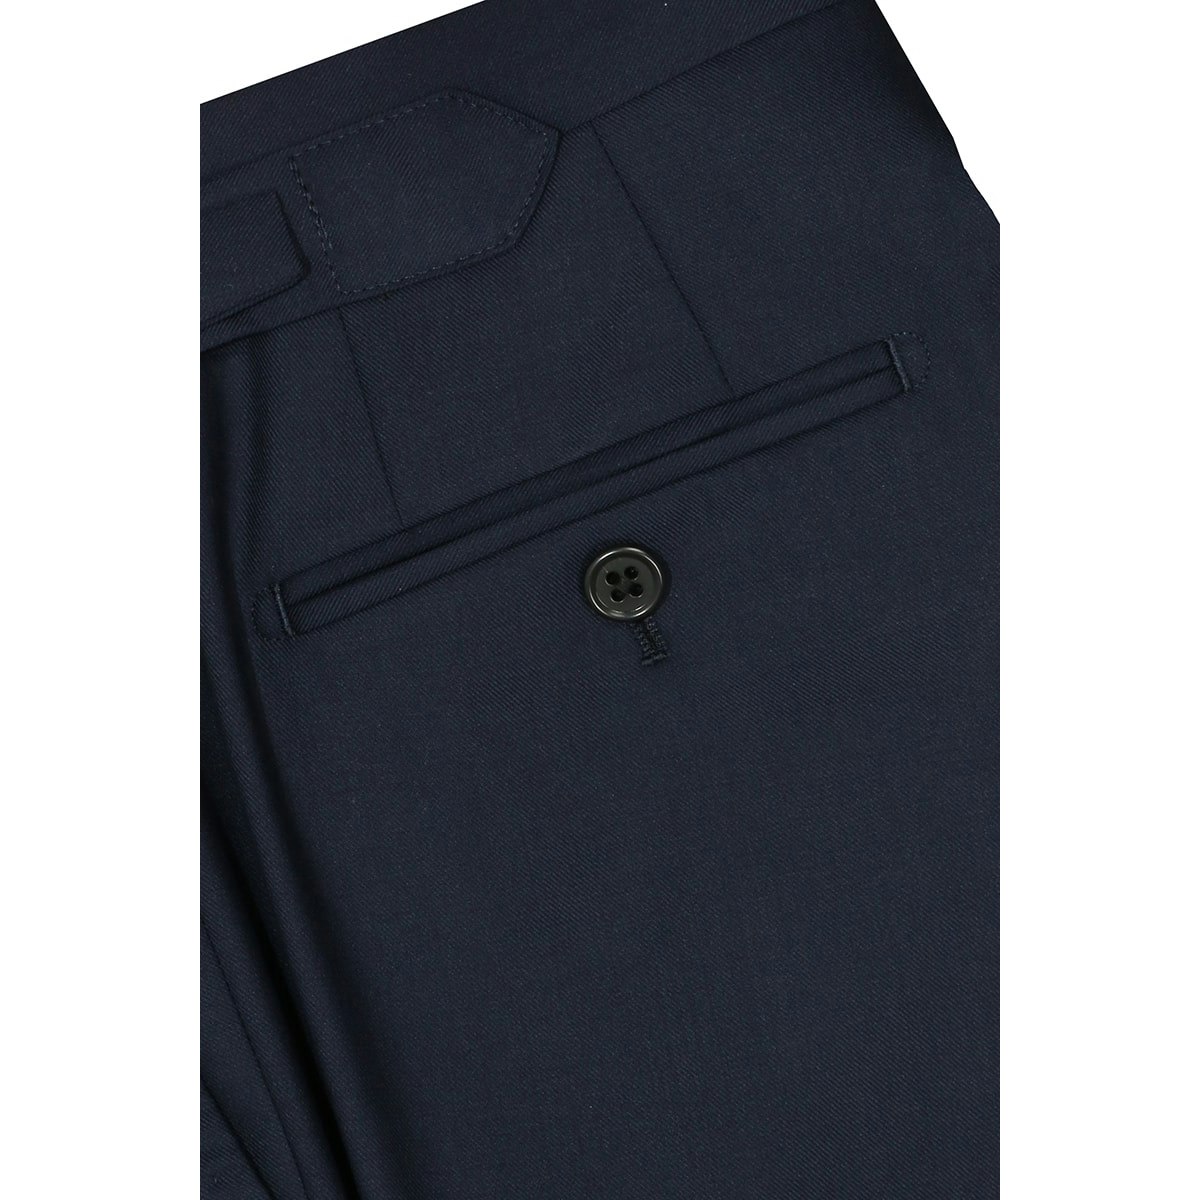 InStitchu Collection Andrade Navy Wool Pants